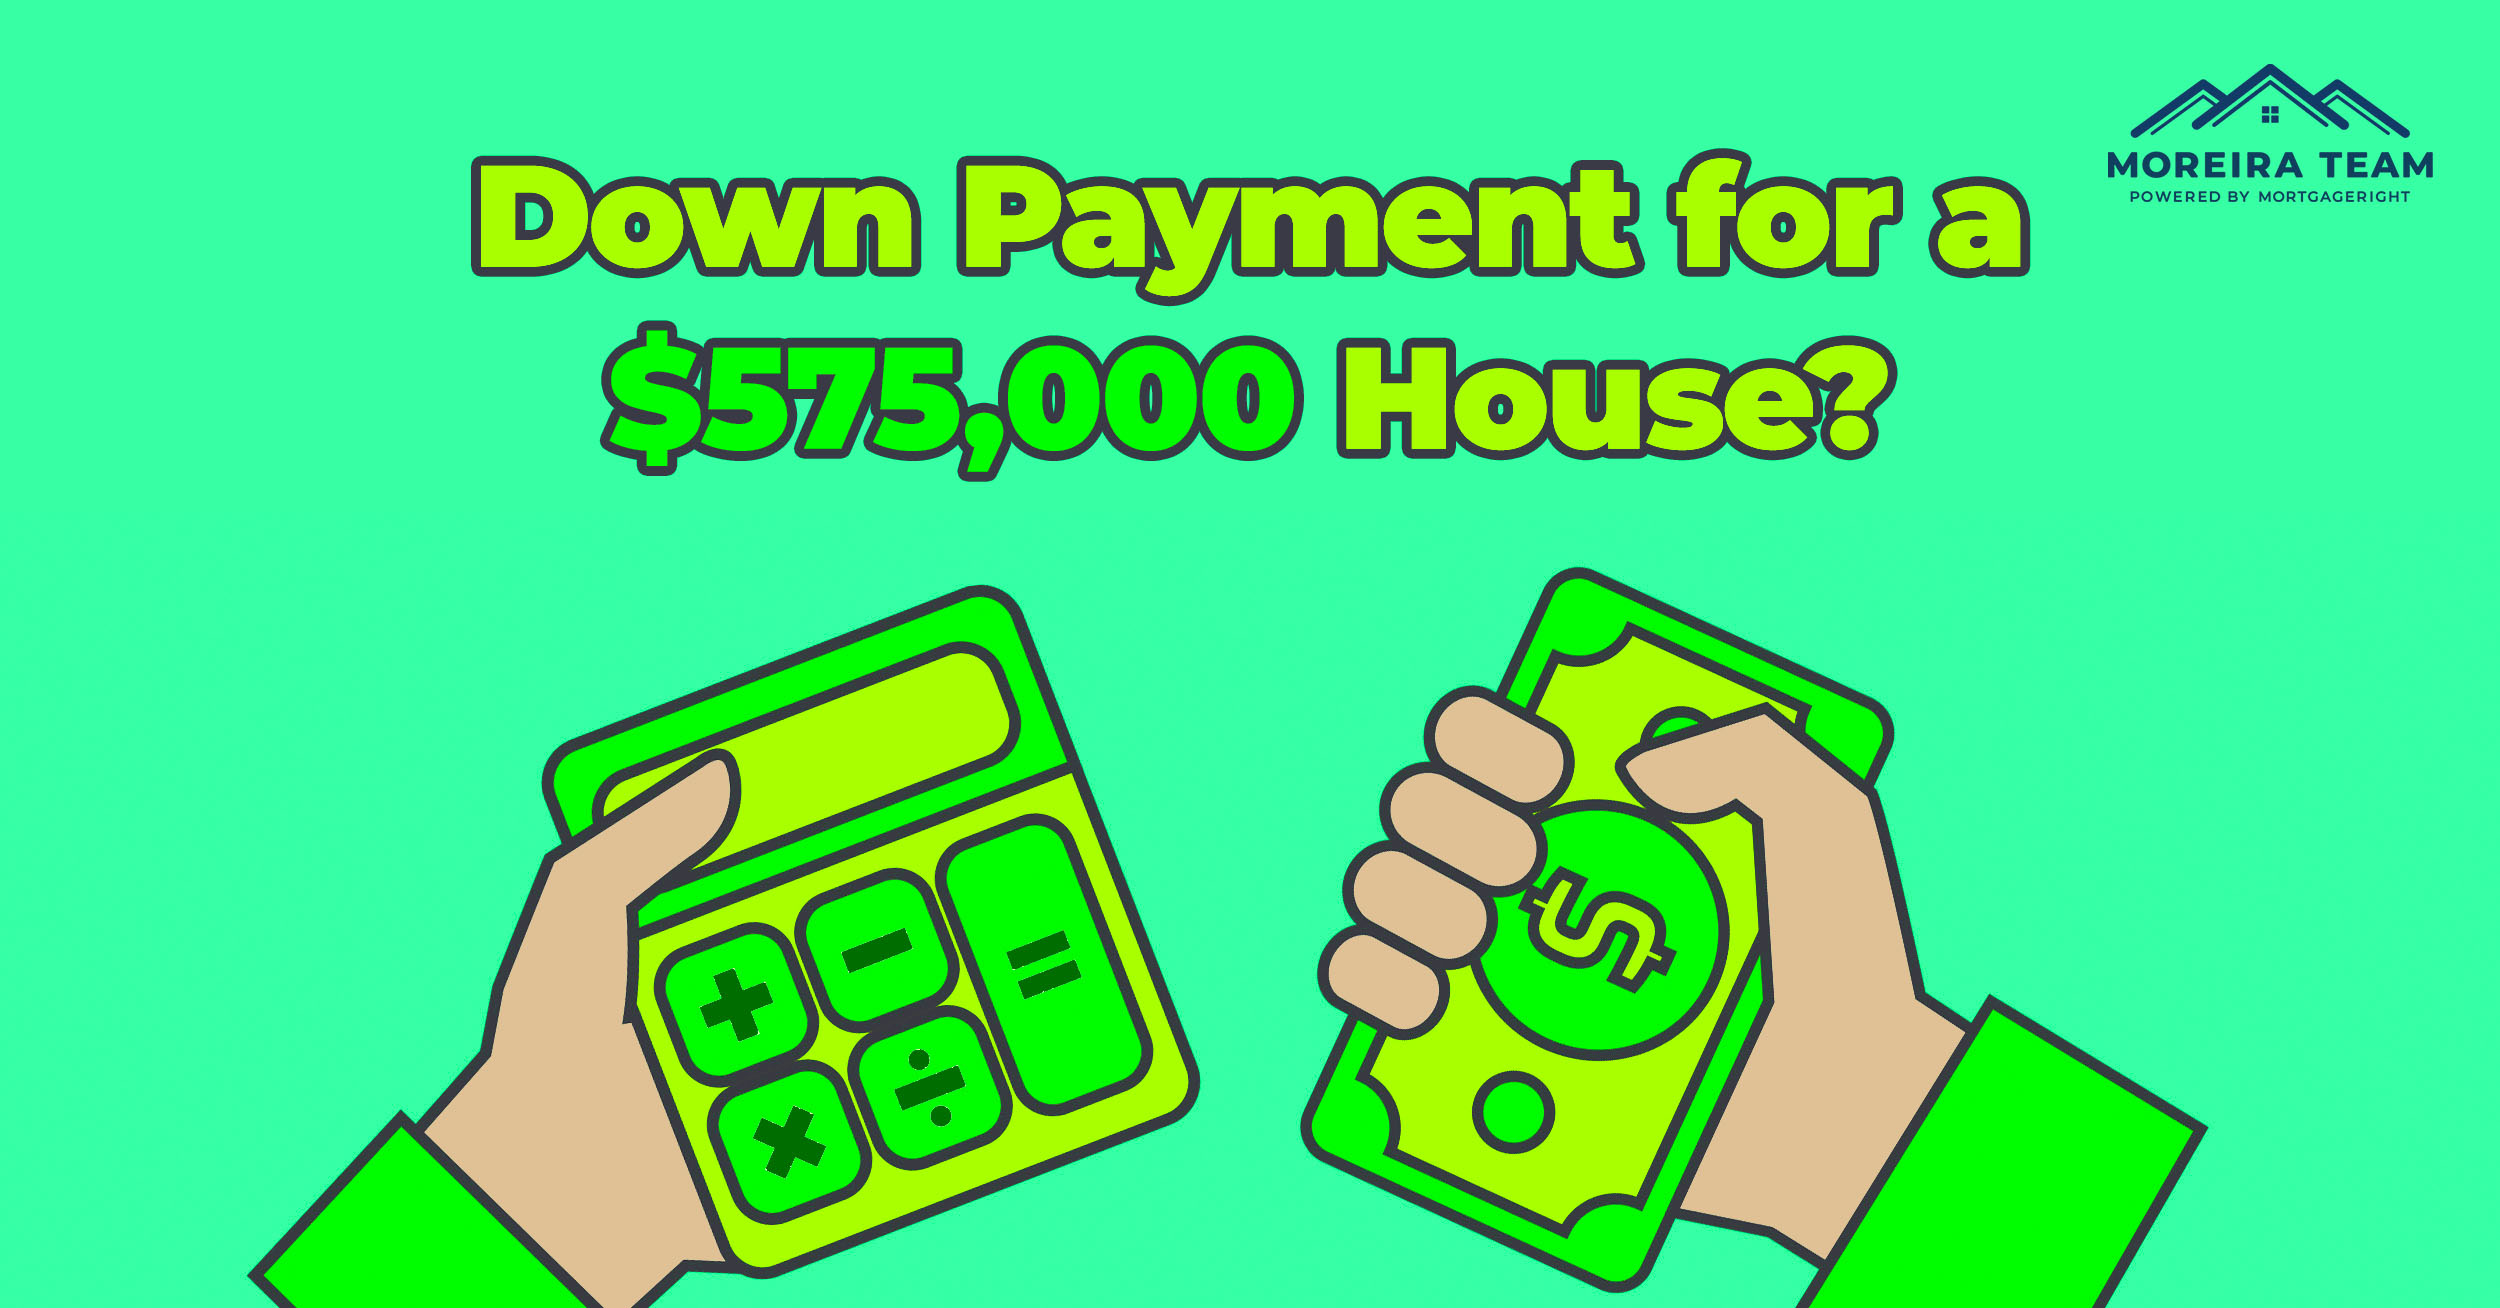 How Much is the Down Payment for a $575,000 Home?